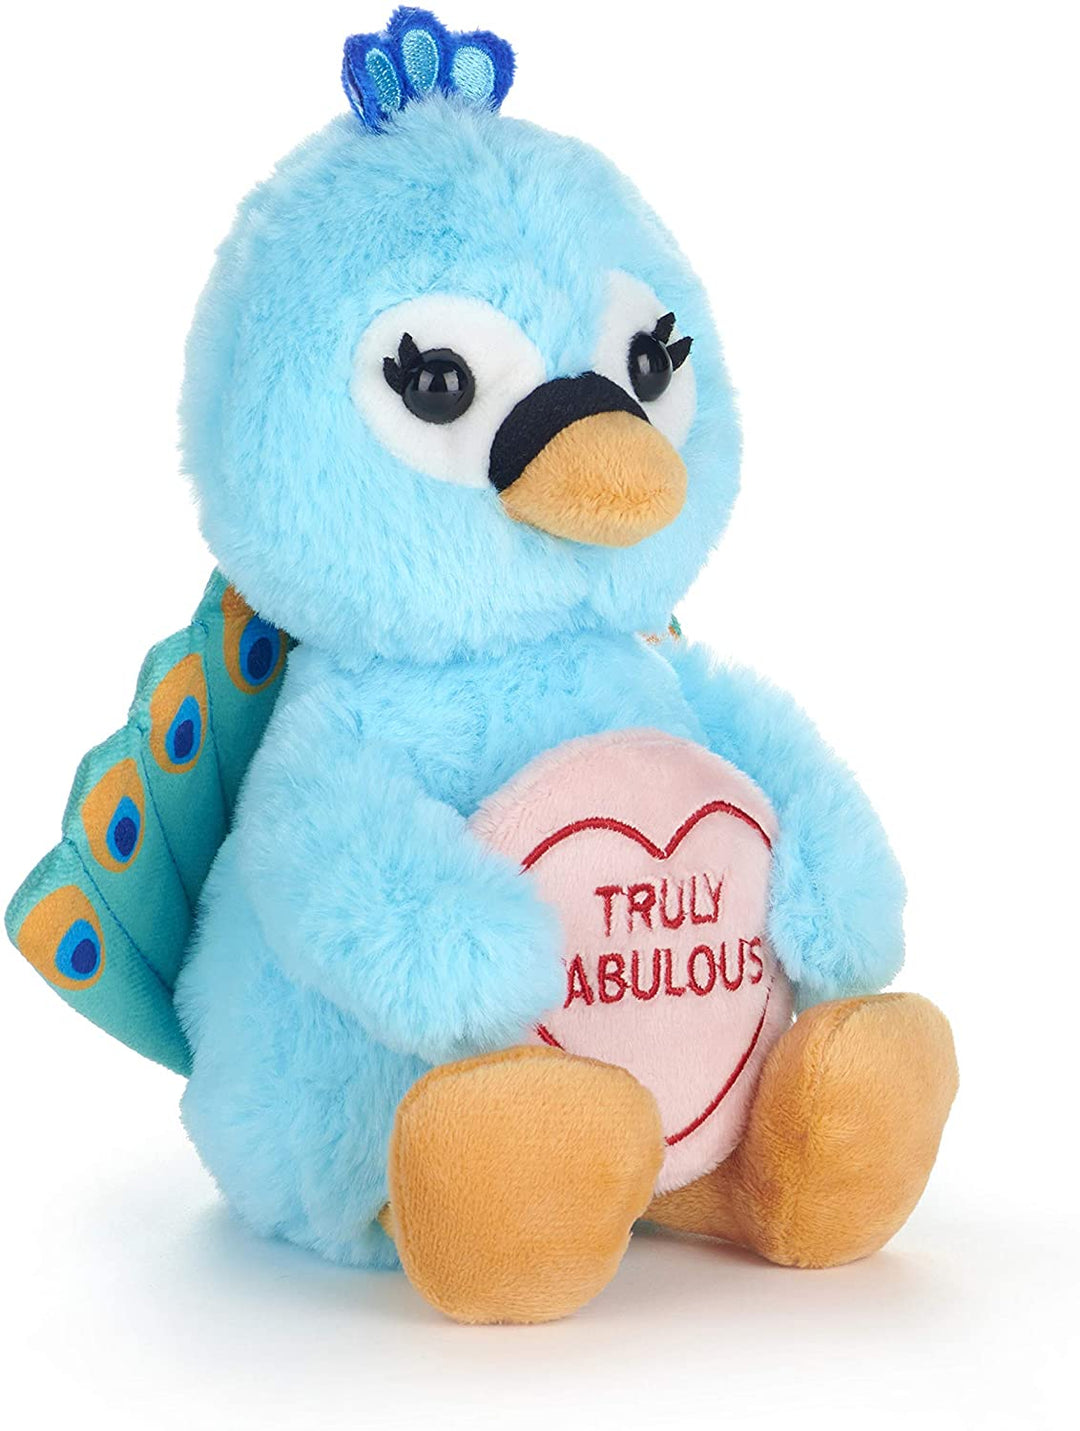 Posh Paws 37332 Swizzels Love Hearts 18cm (7&quot;) Peacock Truly Fabulous Message Knuffel